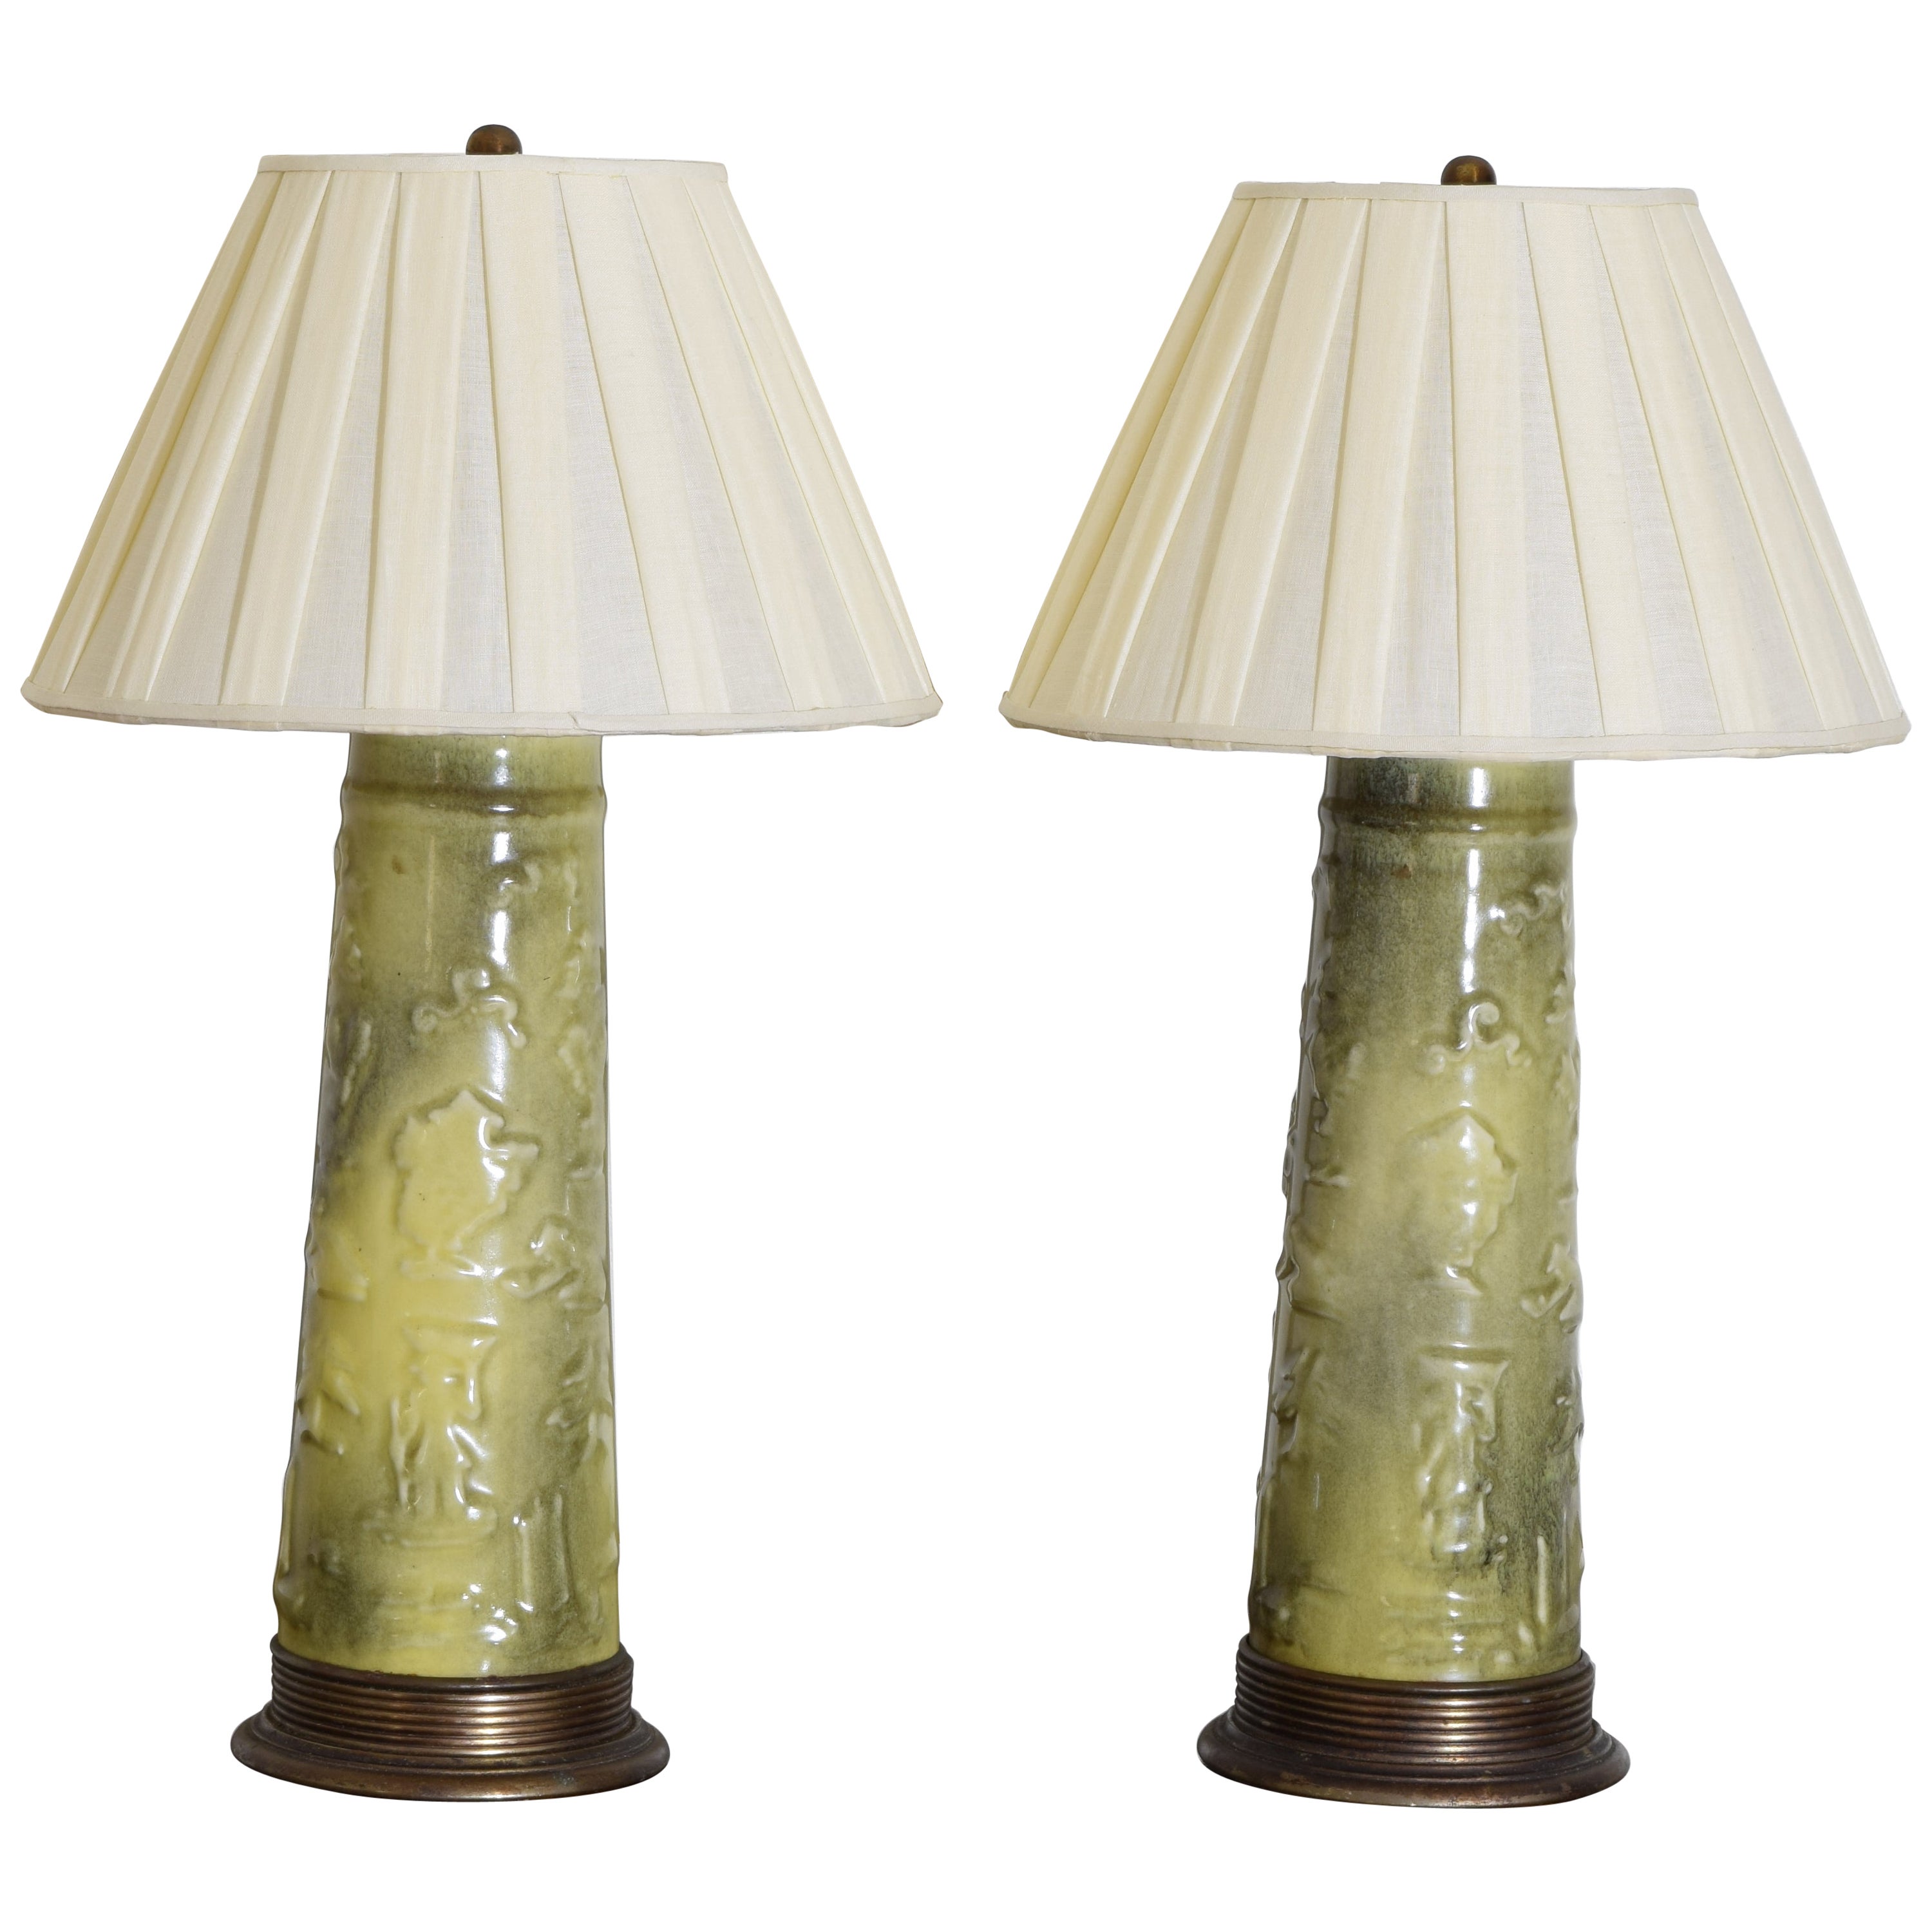 Pair of Ceramic Table Lamps in the Japanese Taste, mid 20th century For Sale